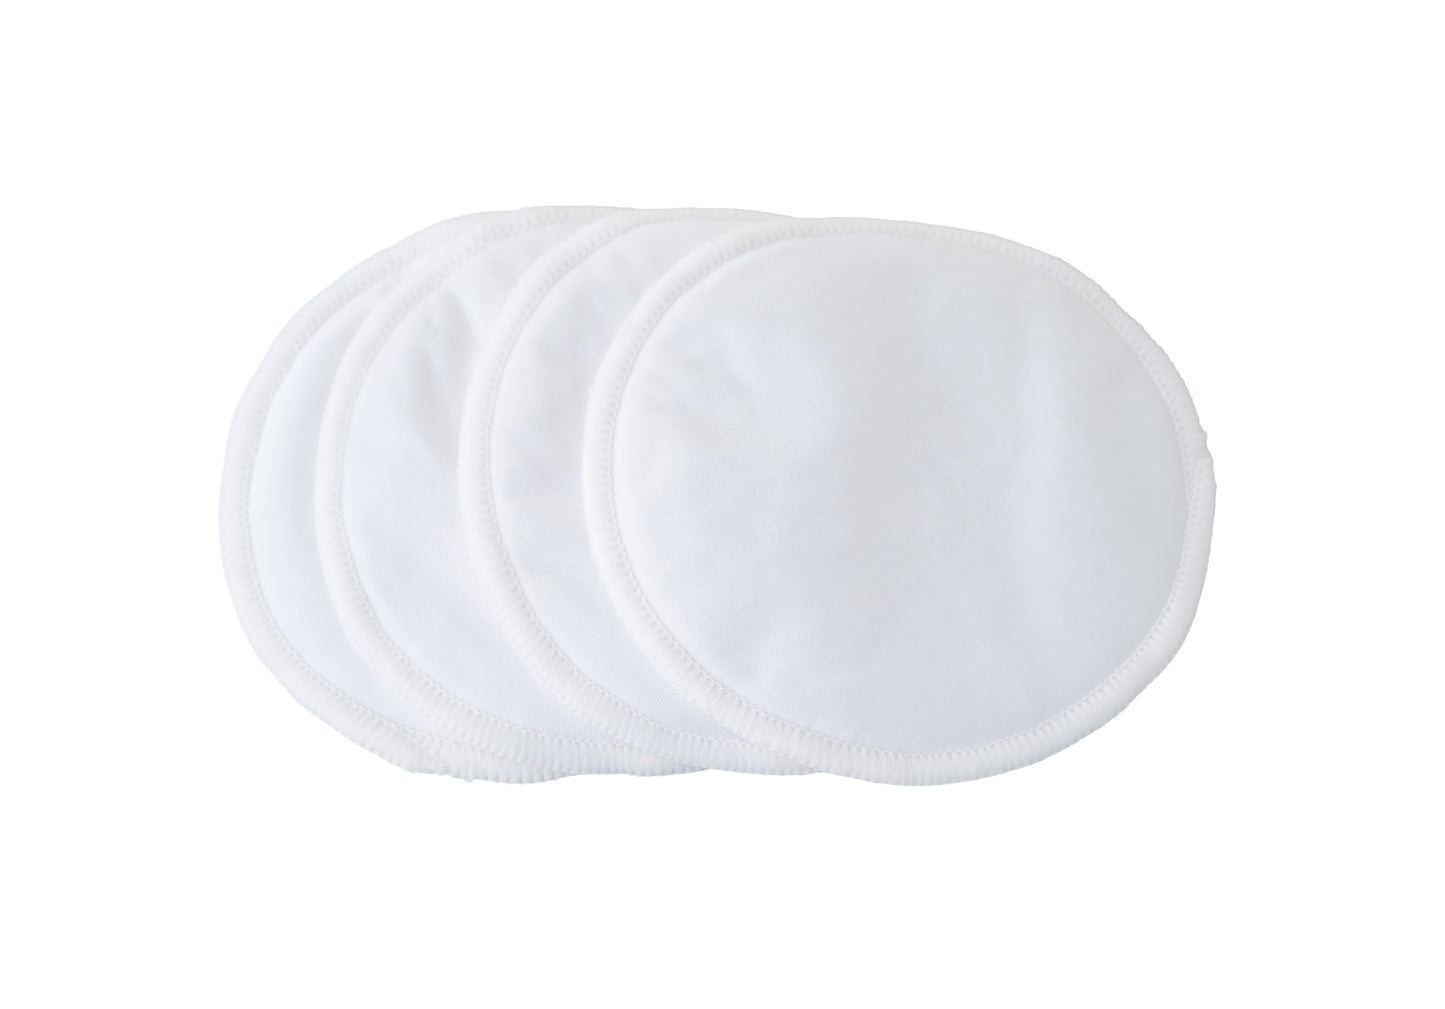 Importikaah Reusable Maternity Breast Pads | Washable Nursing Pads | Absorbent Comfort Fit Breast Pads- Pack of 2